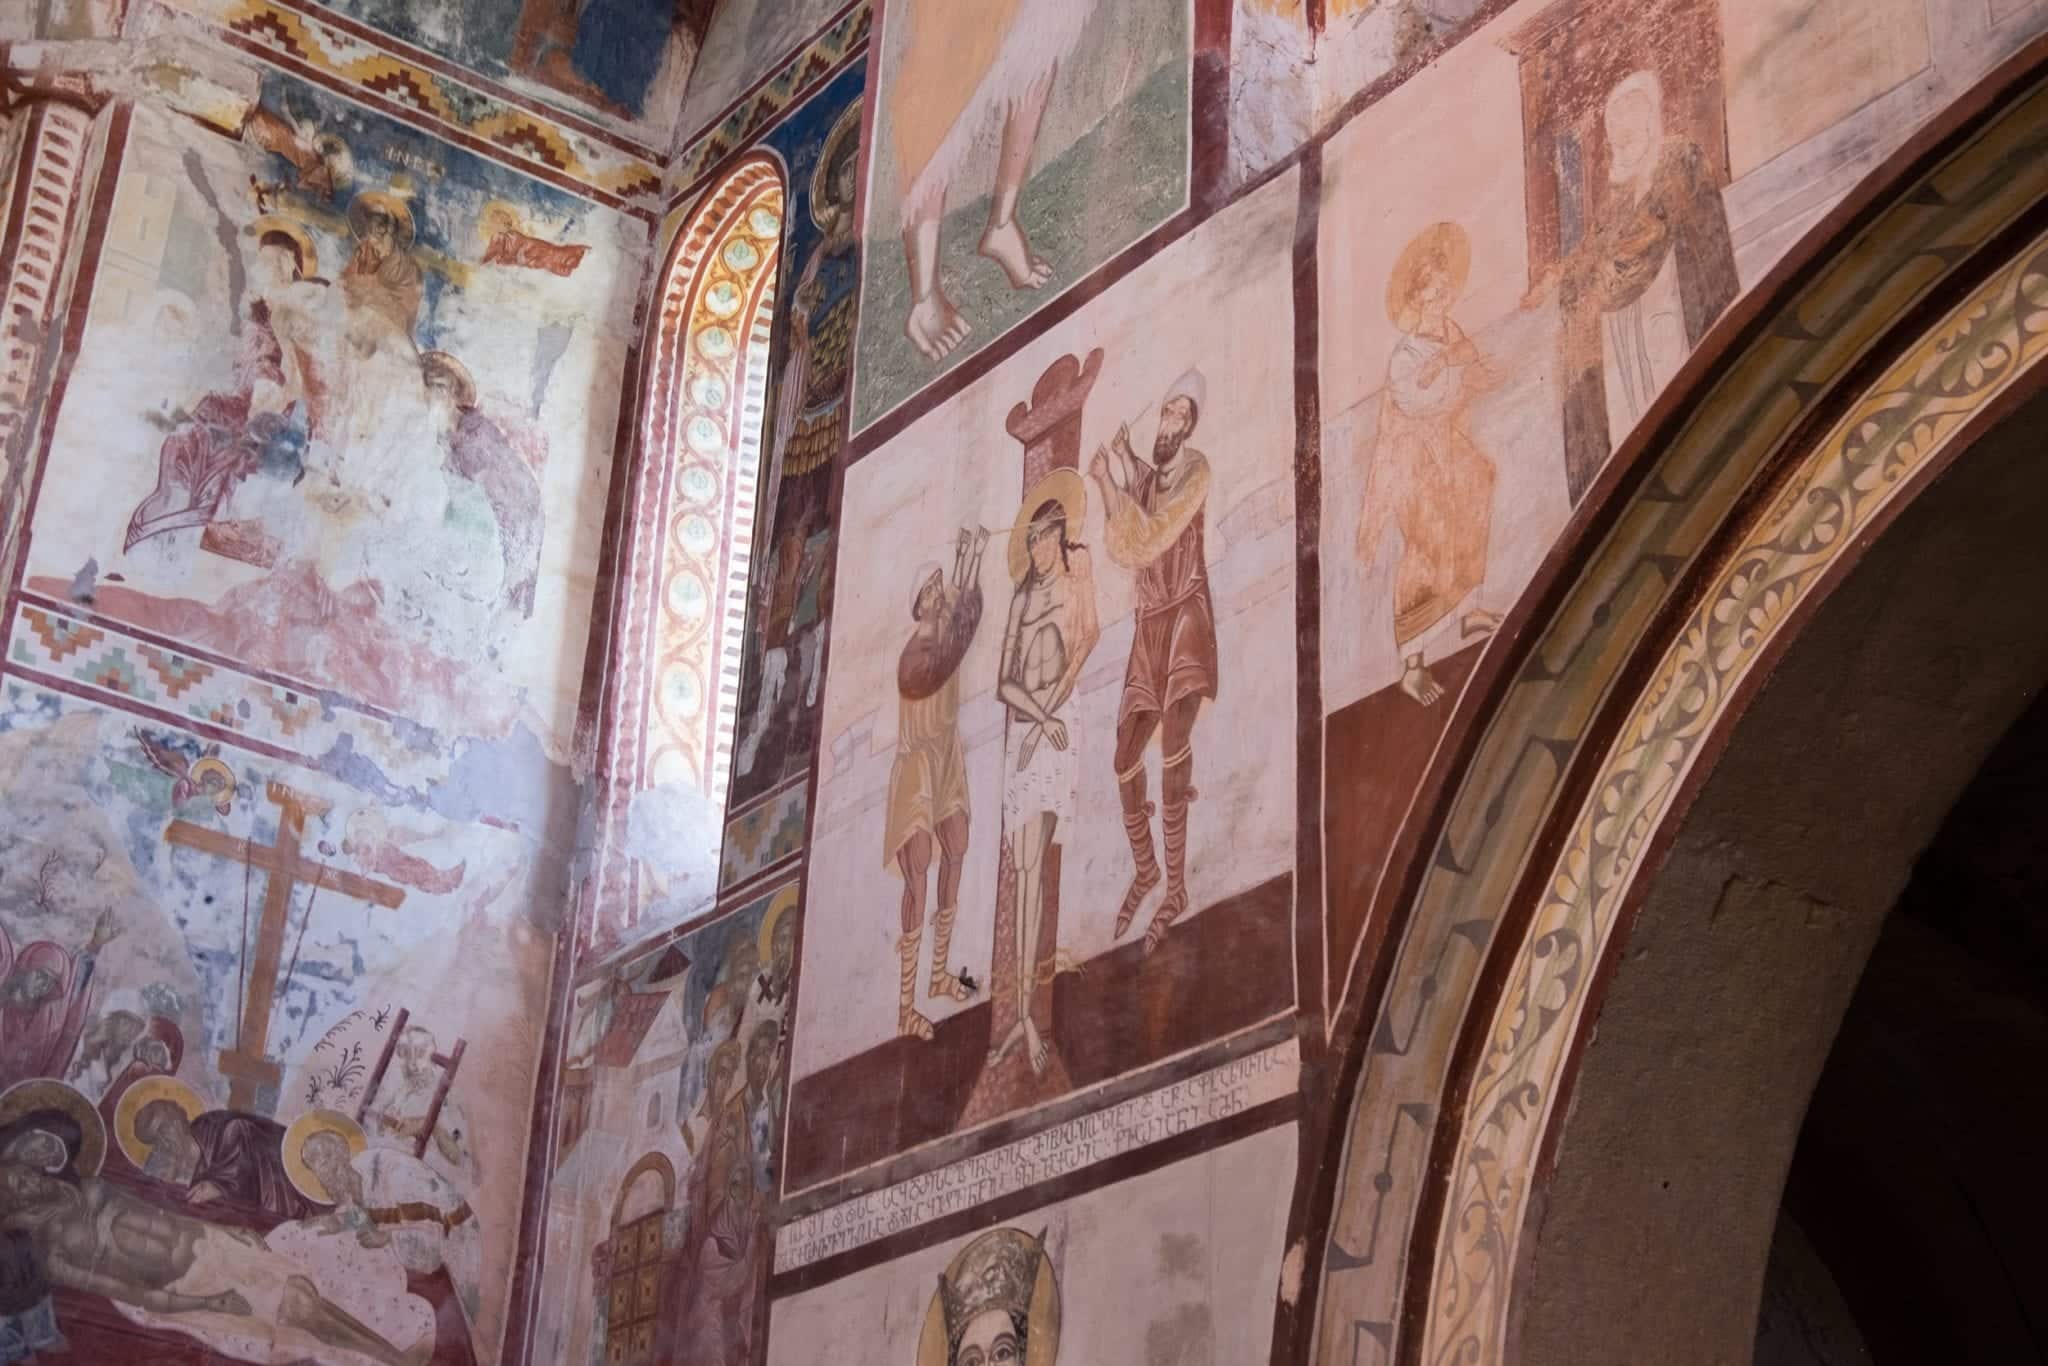 Interior of Gelati Monastery with earth-colored frescoes of sacred scenes in the Bible painted on the walls.